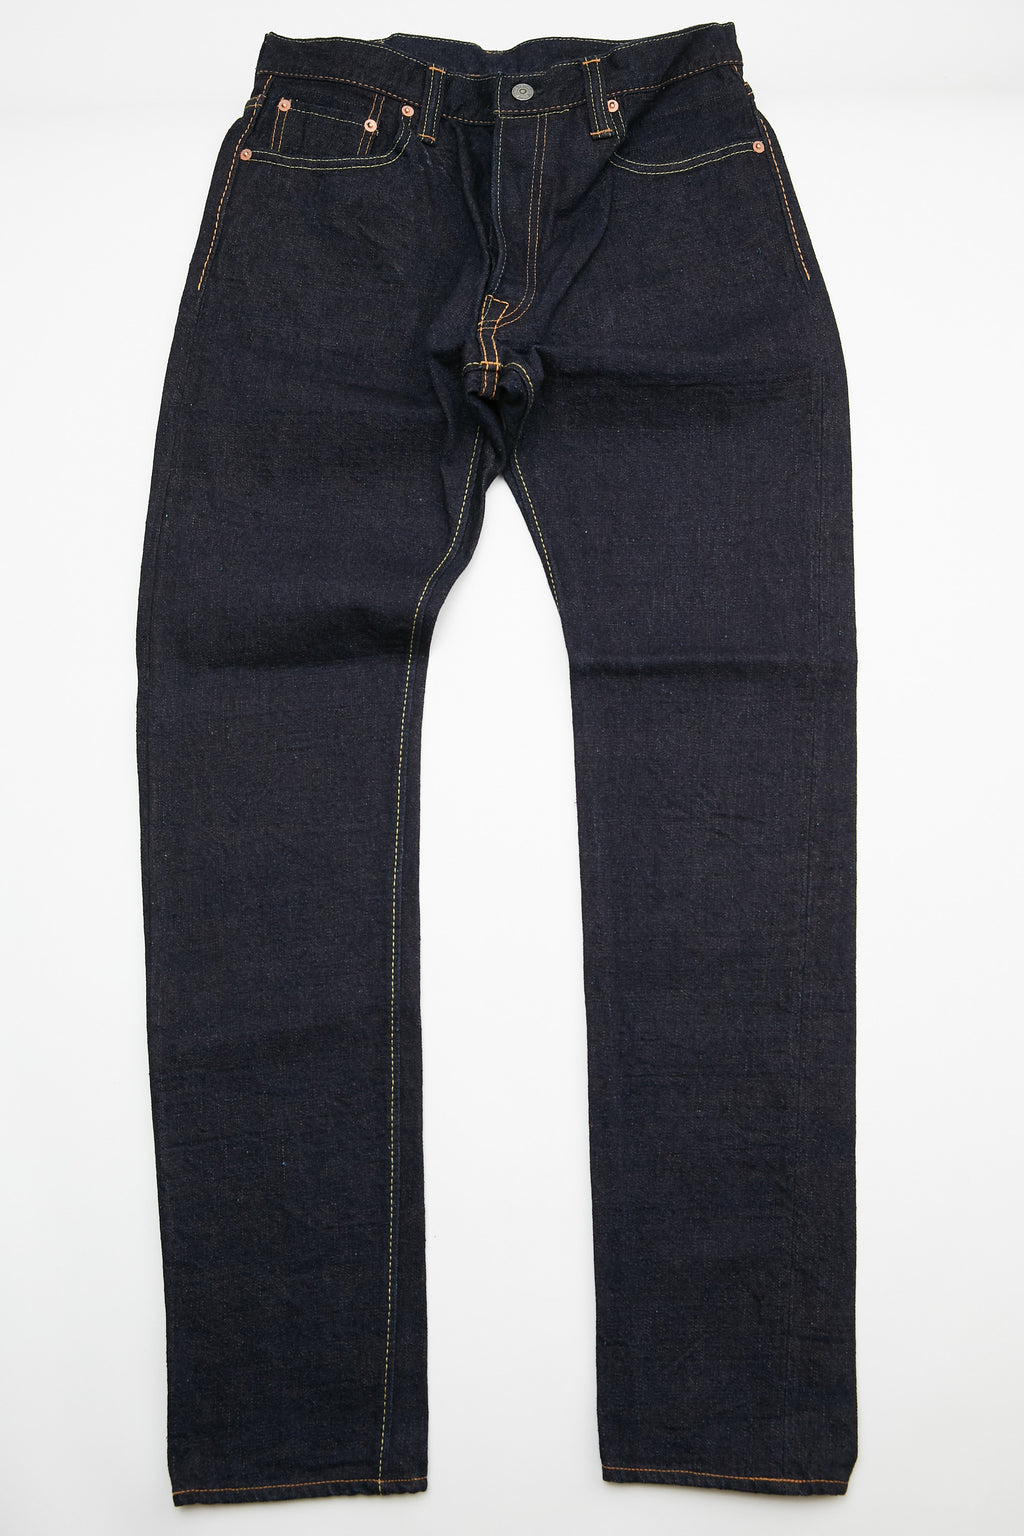 Pure Blue Japan OG-019 Men's Woven 14oz Organic Jeans + Recycled Denim Relaxed Tapered Wash - Indigo x Brown